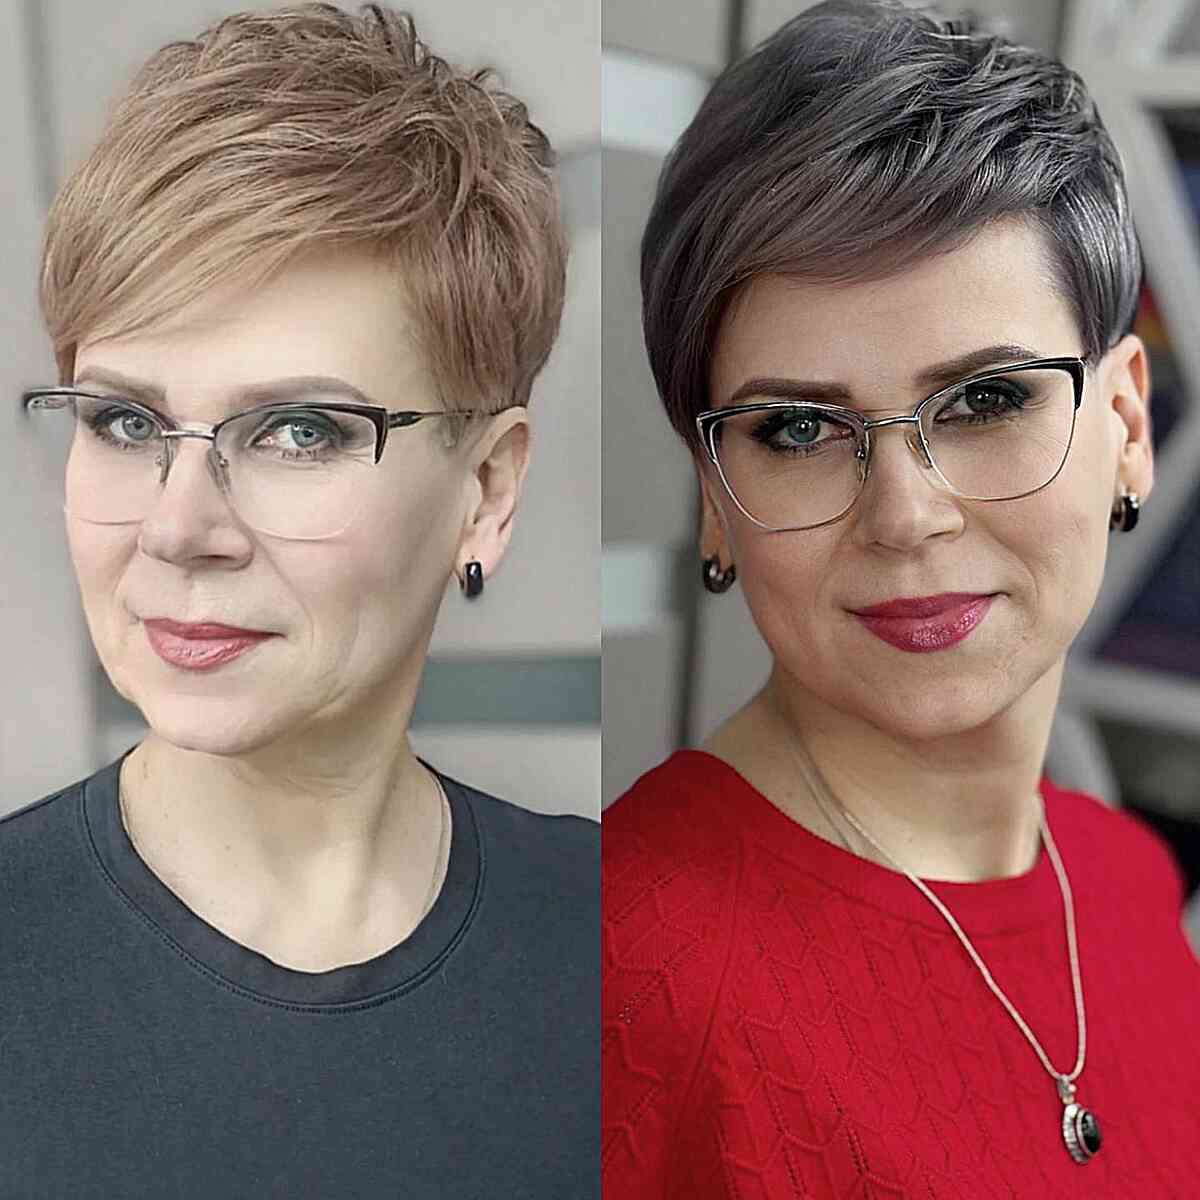 Deep Gray on Side-Swept Pixie for Older Ladies Over 50 with Glasses